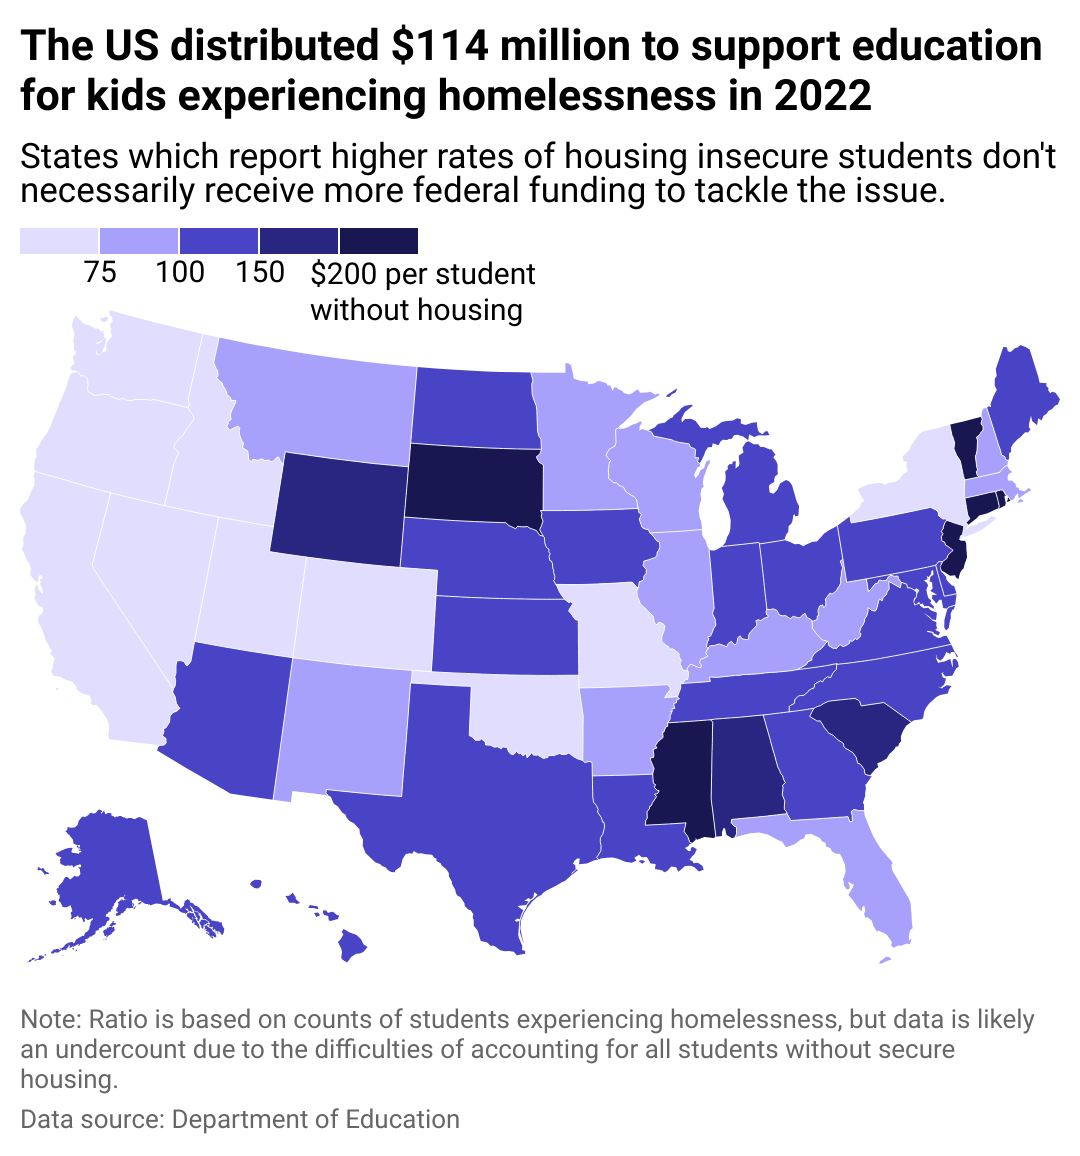 Map showing which states received the most funds to support homeless children and youth education in 2022 based on public school population. Utah leads the way.